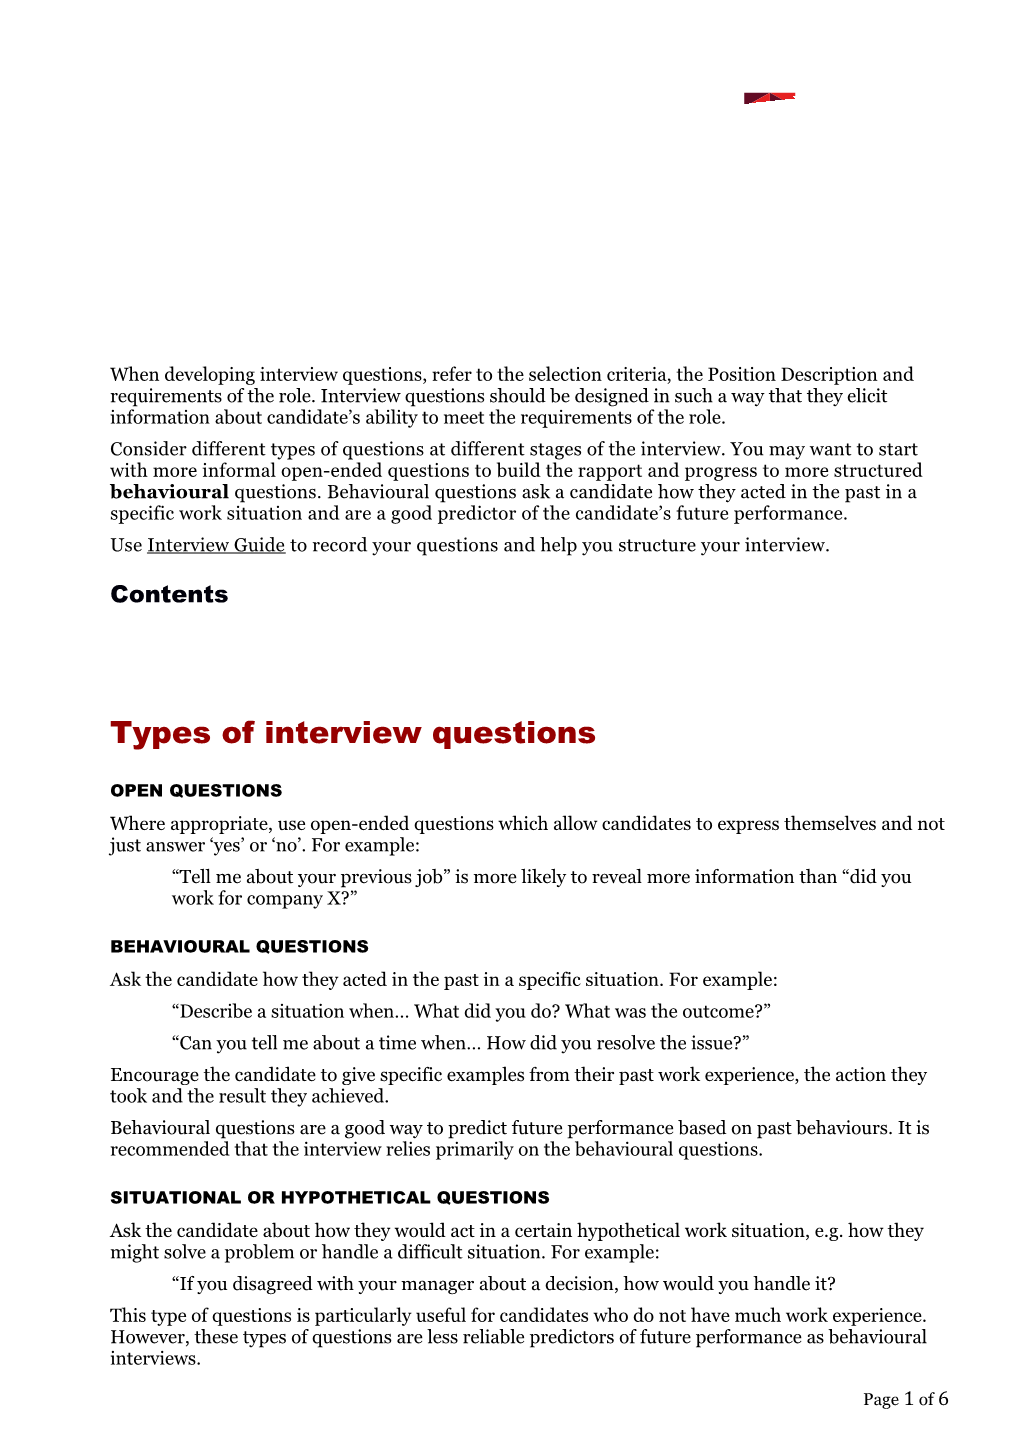 When Developing Interview Questions, Refer to the Selection Criteria, the Position Description